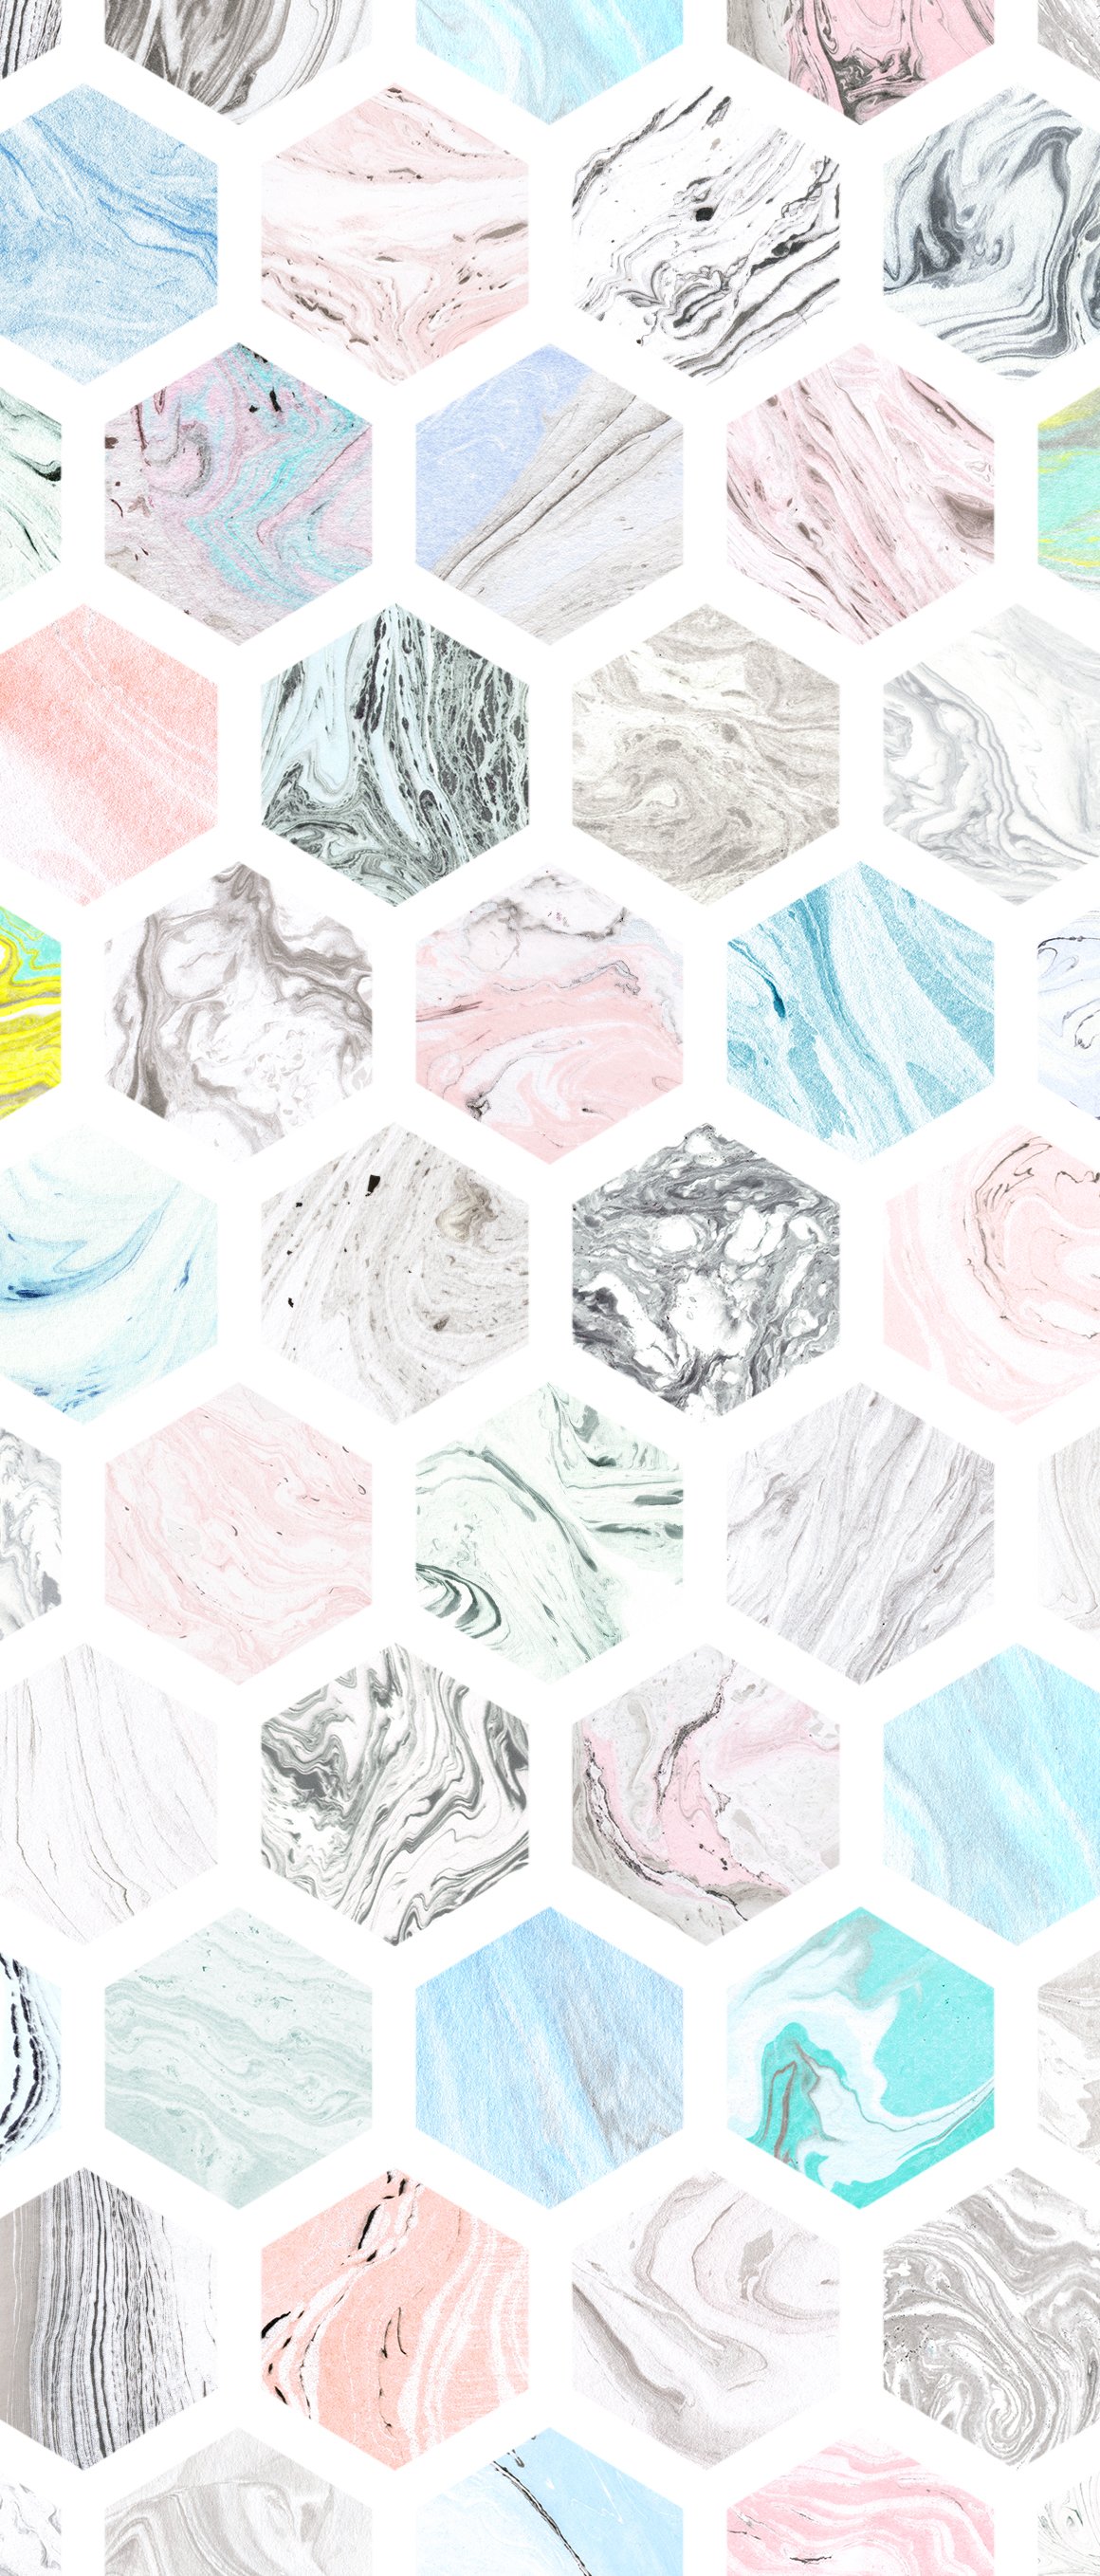 All variations of marble color textures.